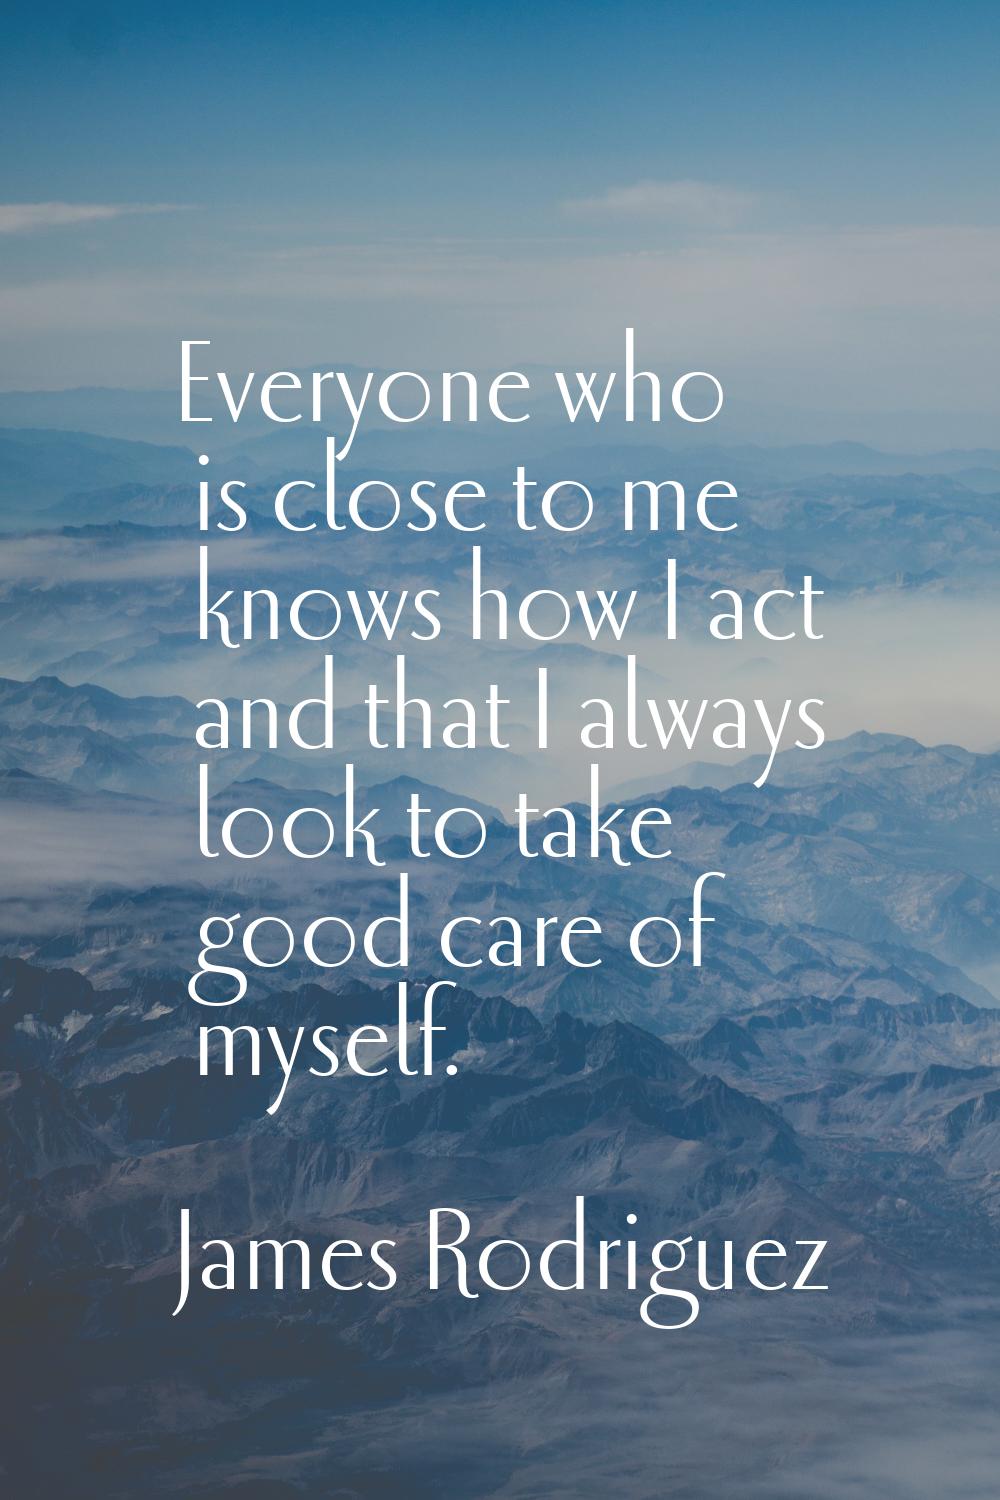 Everyone who is close to me knows how I act and that I always look to take good care of myself.